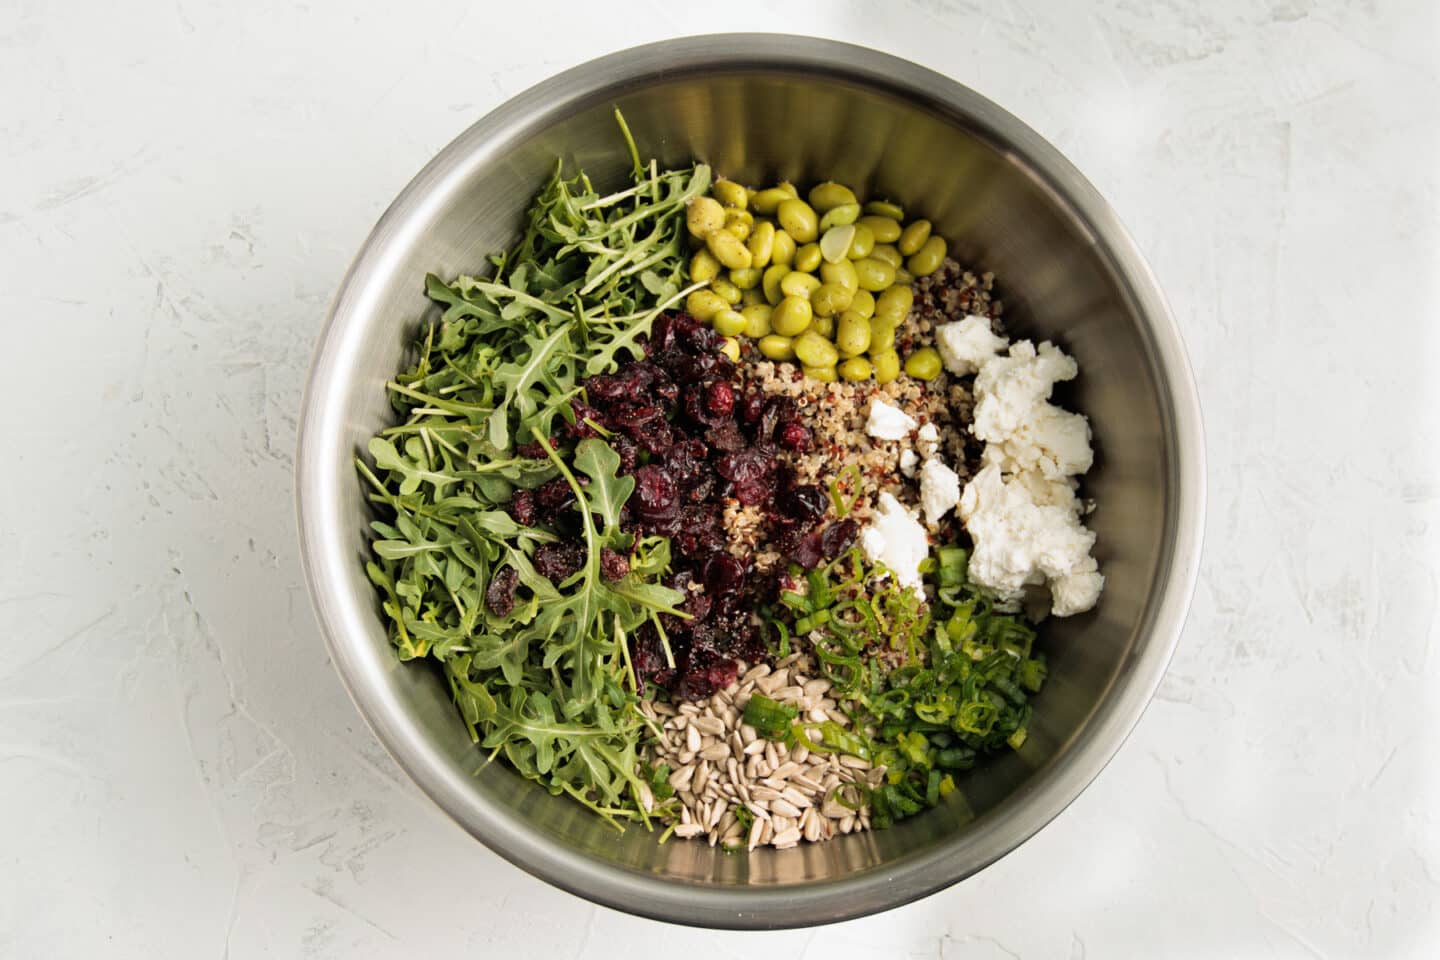 Bowl with all ingredients of quinoa arugula salad before being tossed together.